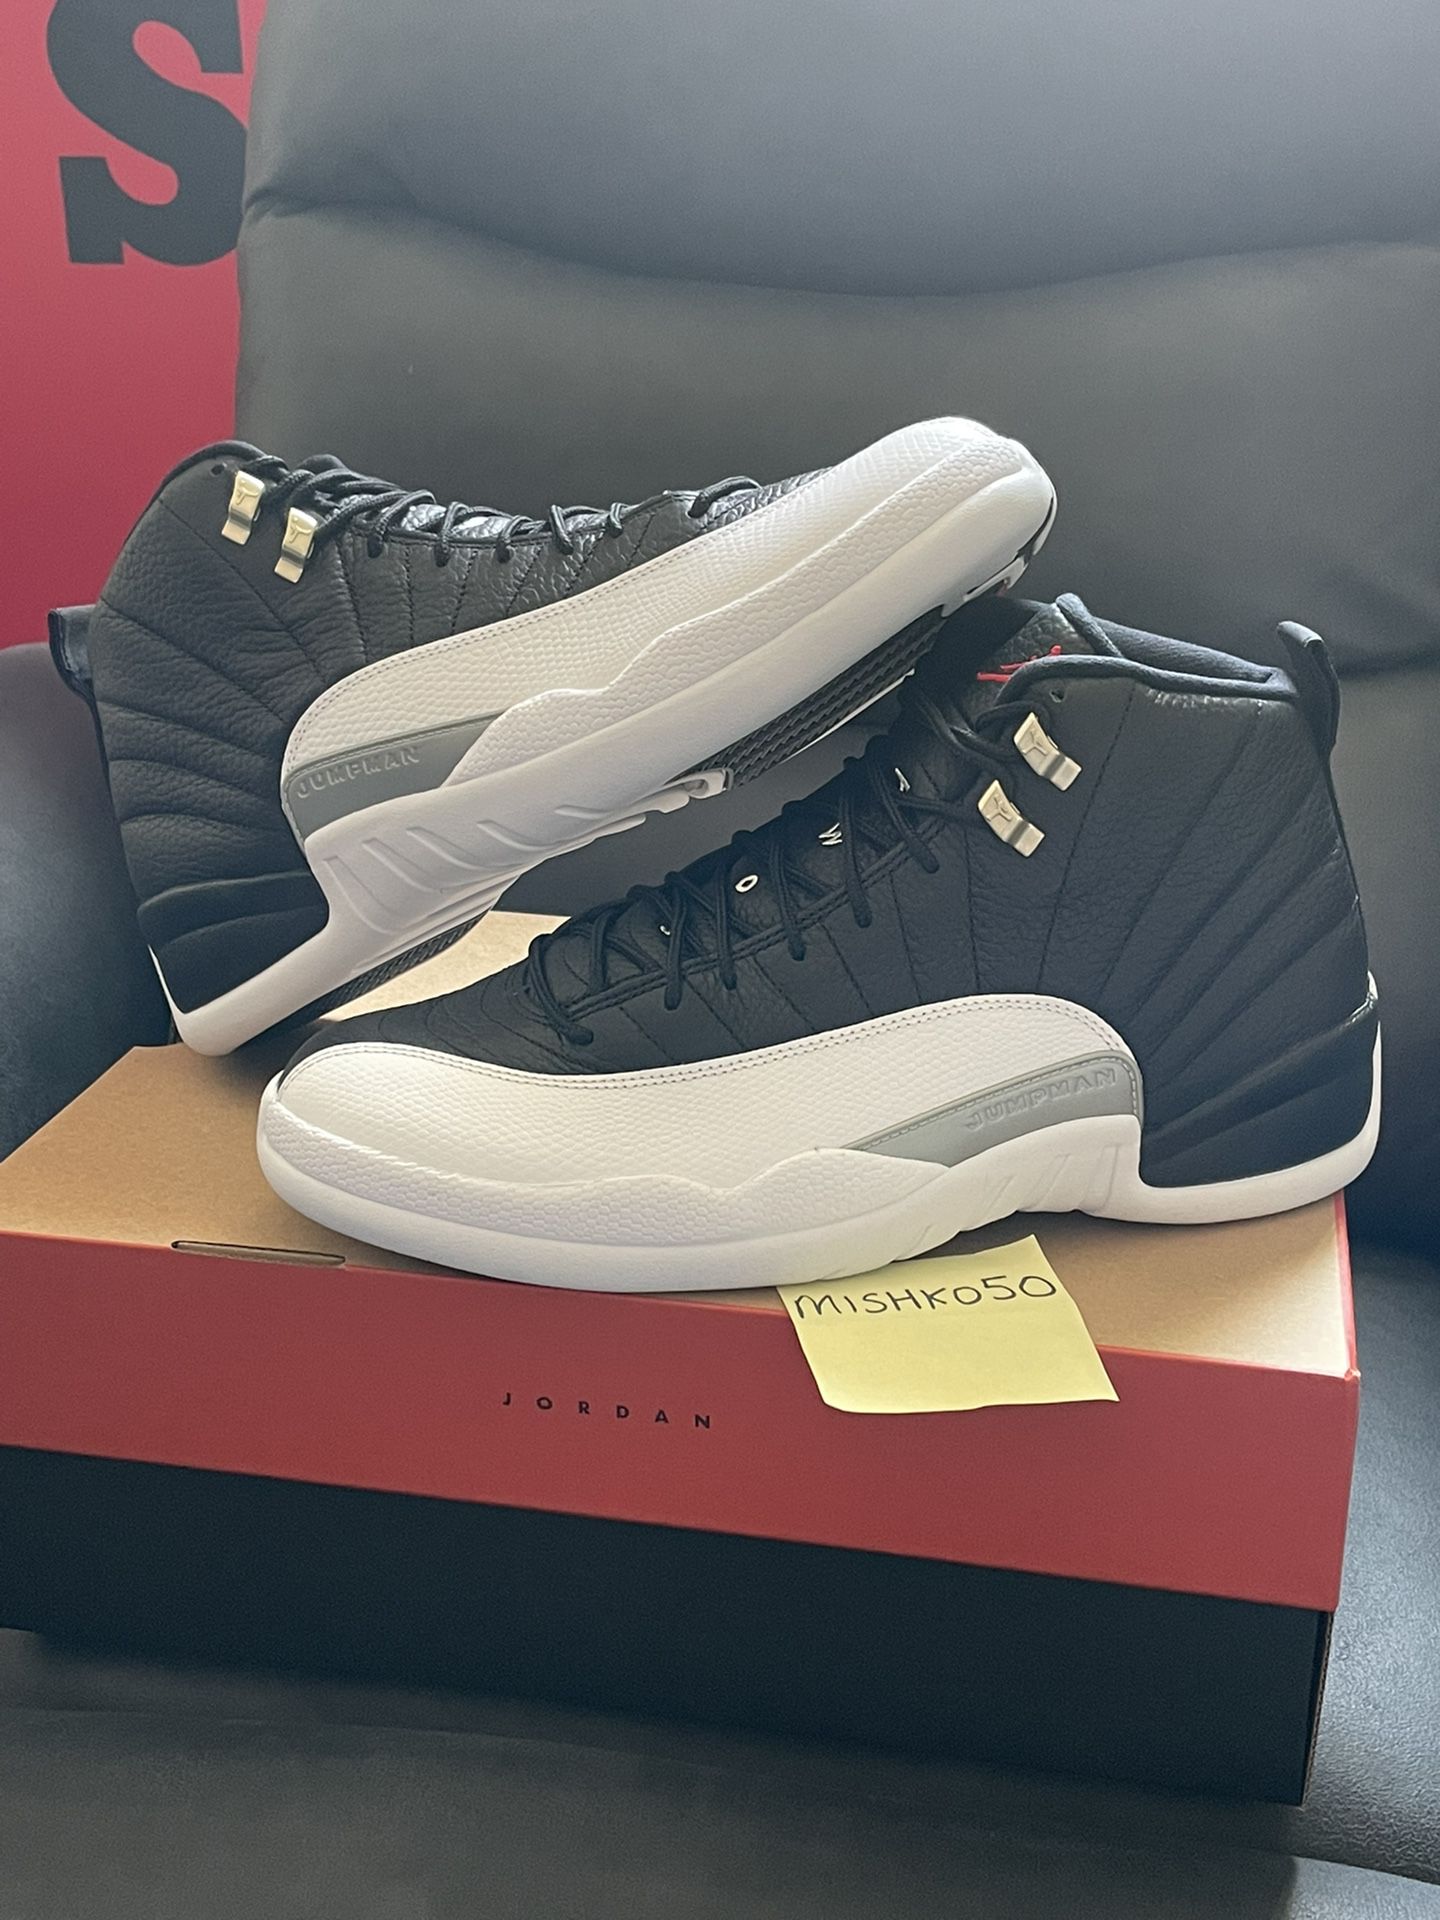 Air Jordan Retro 12 Playoffs Men’s Size 13 Reverse Taxi Black White Nike  High OG 1 Dunk Low Bred UNC 6 Off-White Supreme Panda for Sale in Vernon